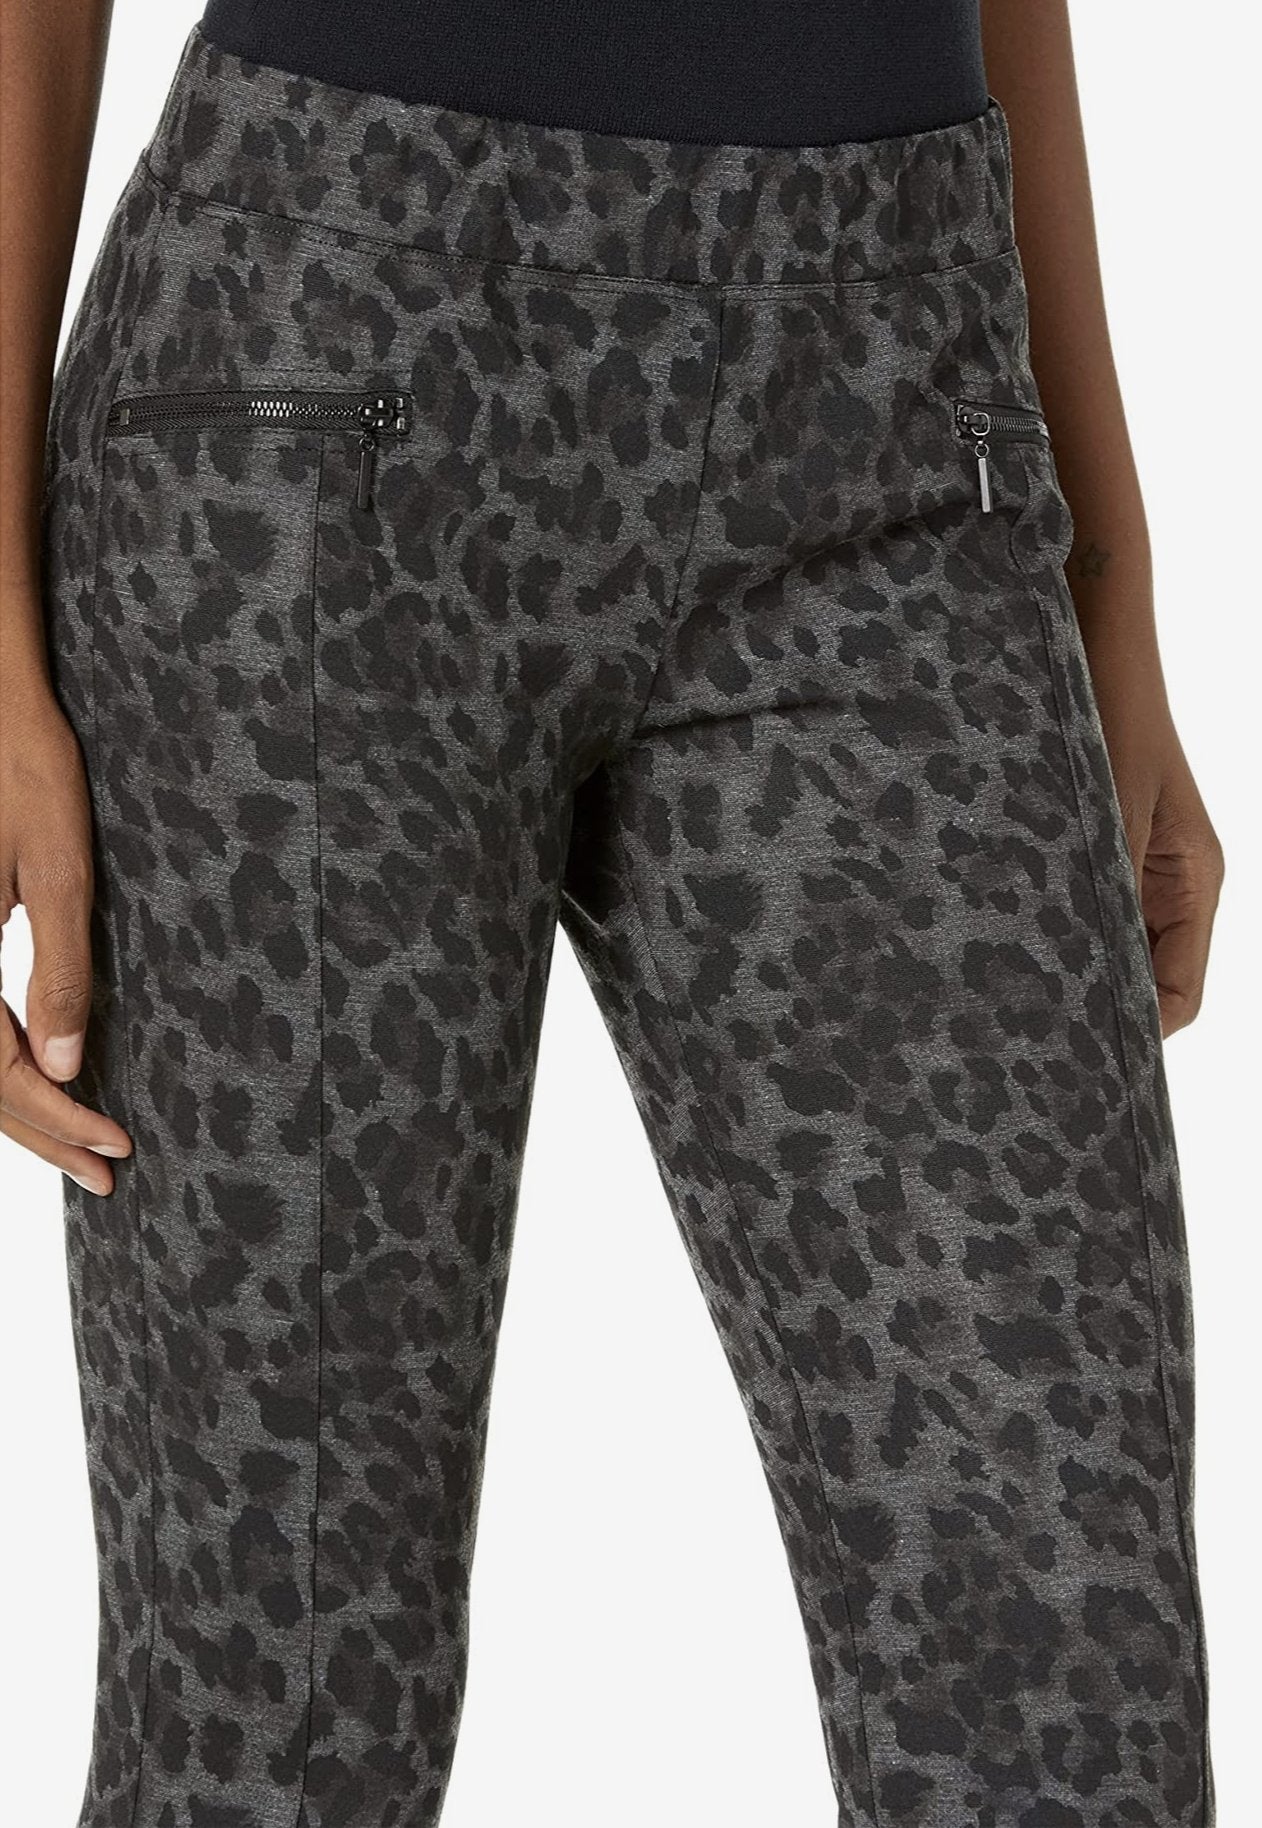 Zootopia Pull On Pant With Zipper Detail - The Posh Loft